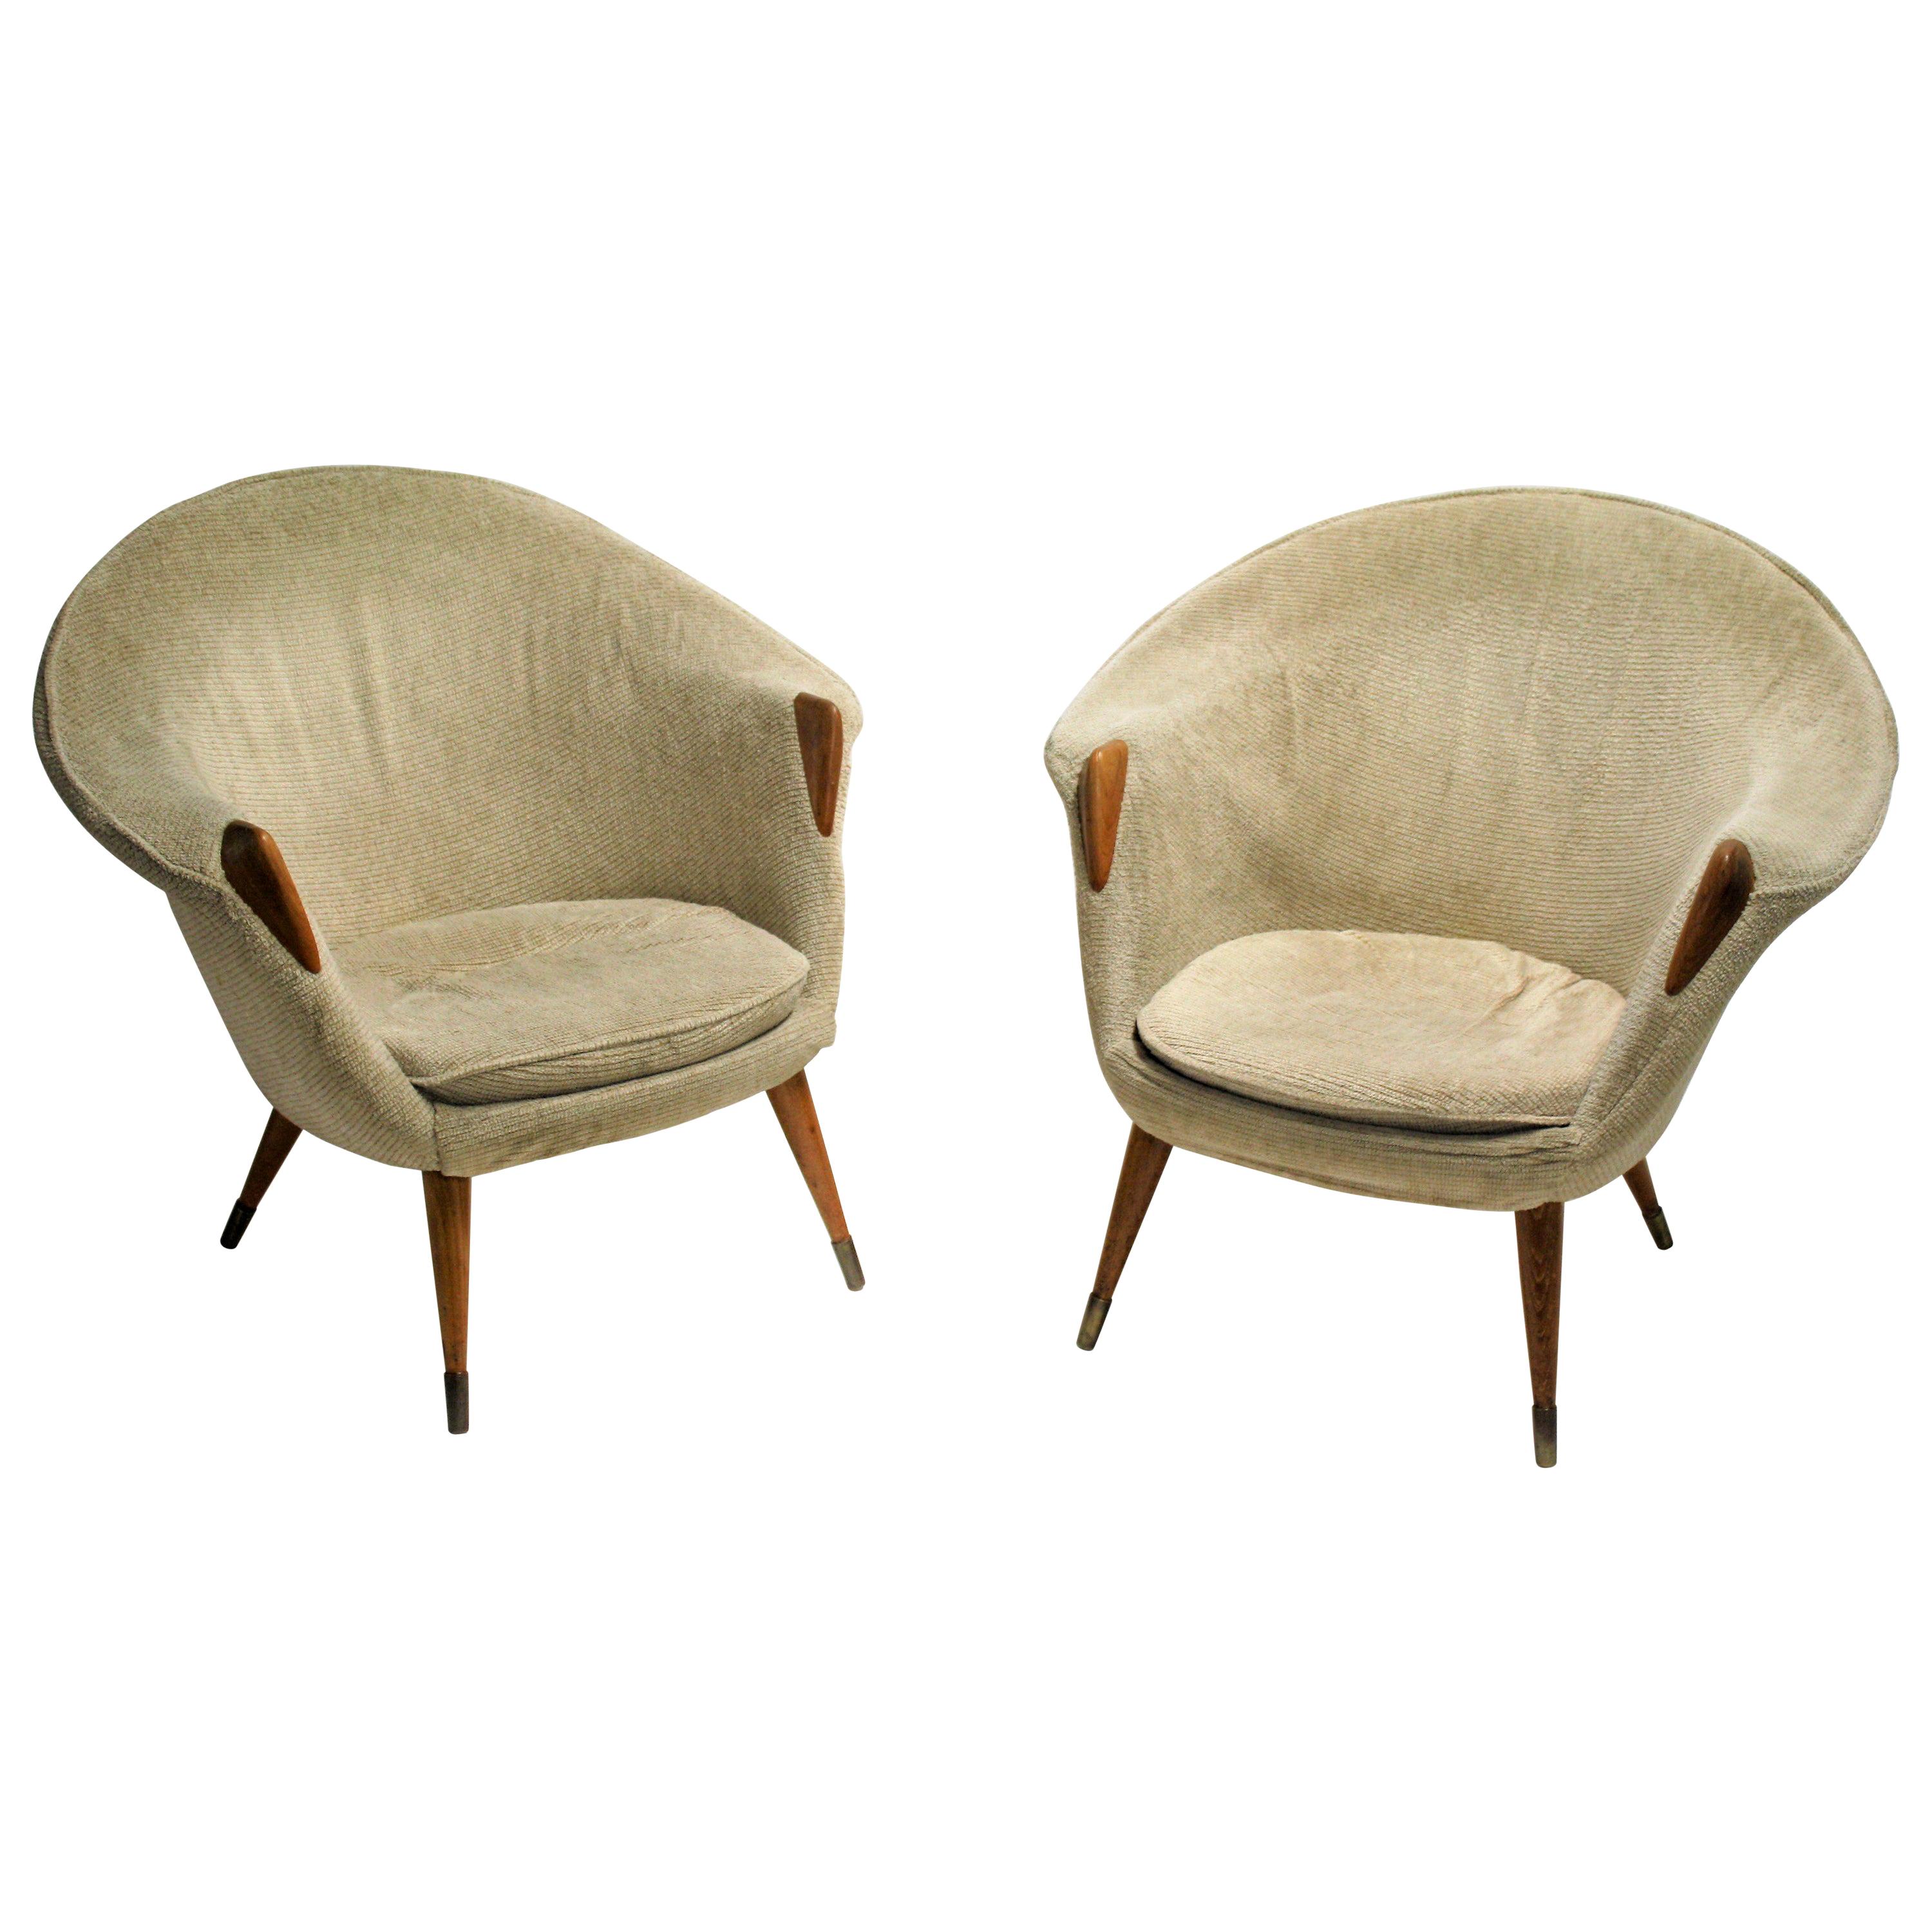 Pair of Vintage Cocktail Chairs, 1960s